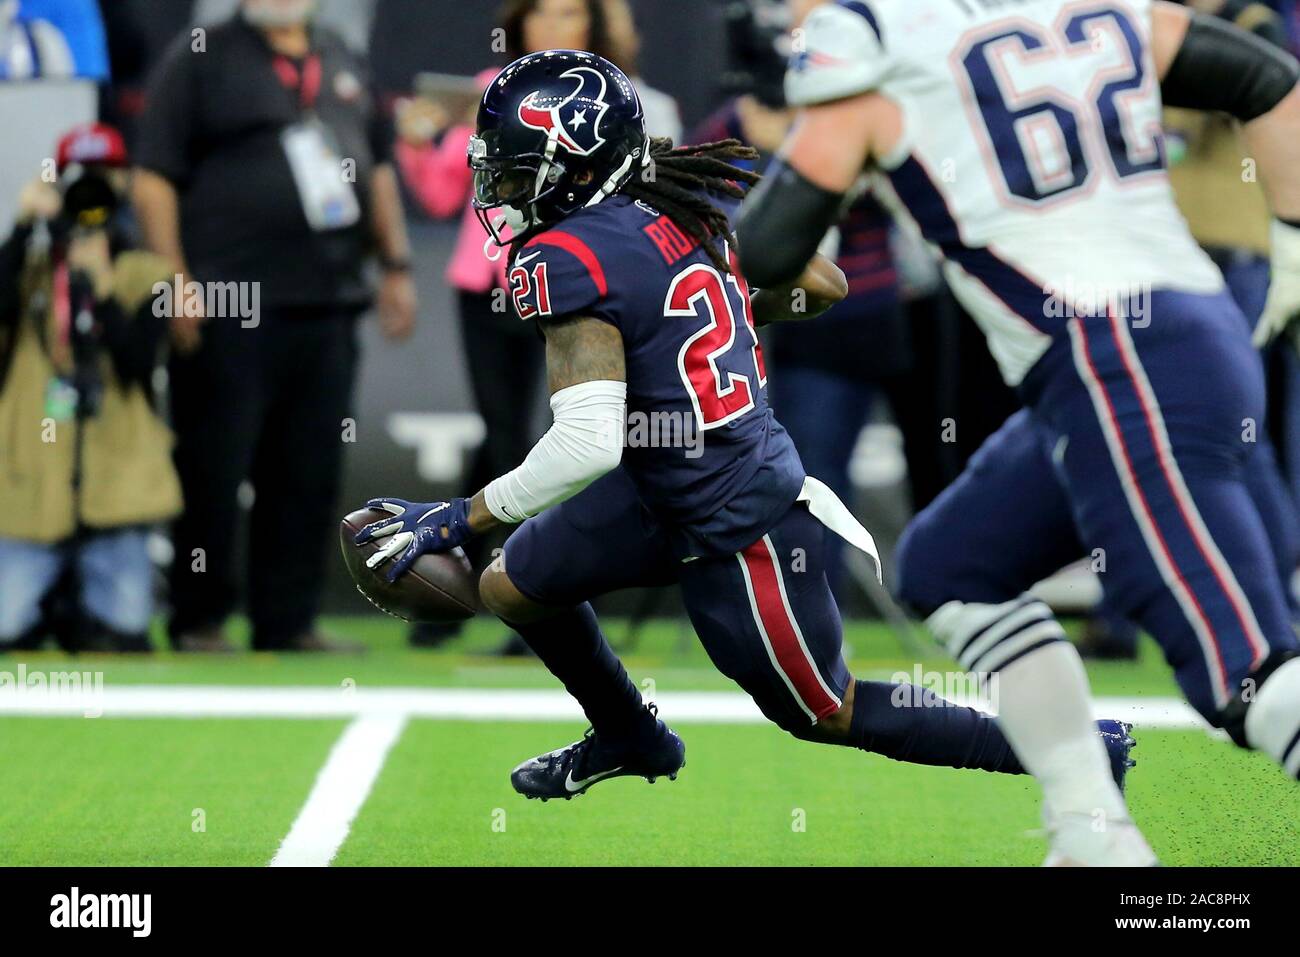 Houston, Texas, USA. 1st Dec, 2019. Houston Texans cornerback Bradley Roby (21) carries the ball upfield after an interception during the first quarter of the NFL regular season game between the Houston Texans and the New England Patriots at NRG Stadium in Houston, TX on December 1, 2019. Credit: Erik Williams/ZUMA Wire/Alamy Live News Stock Photo